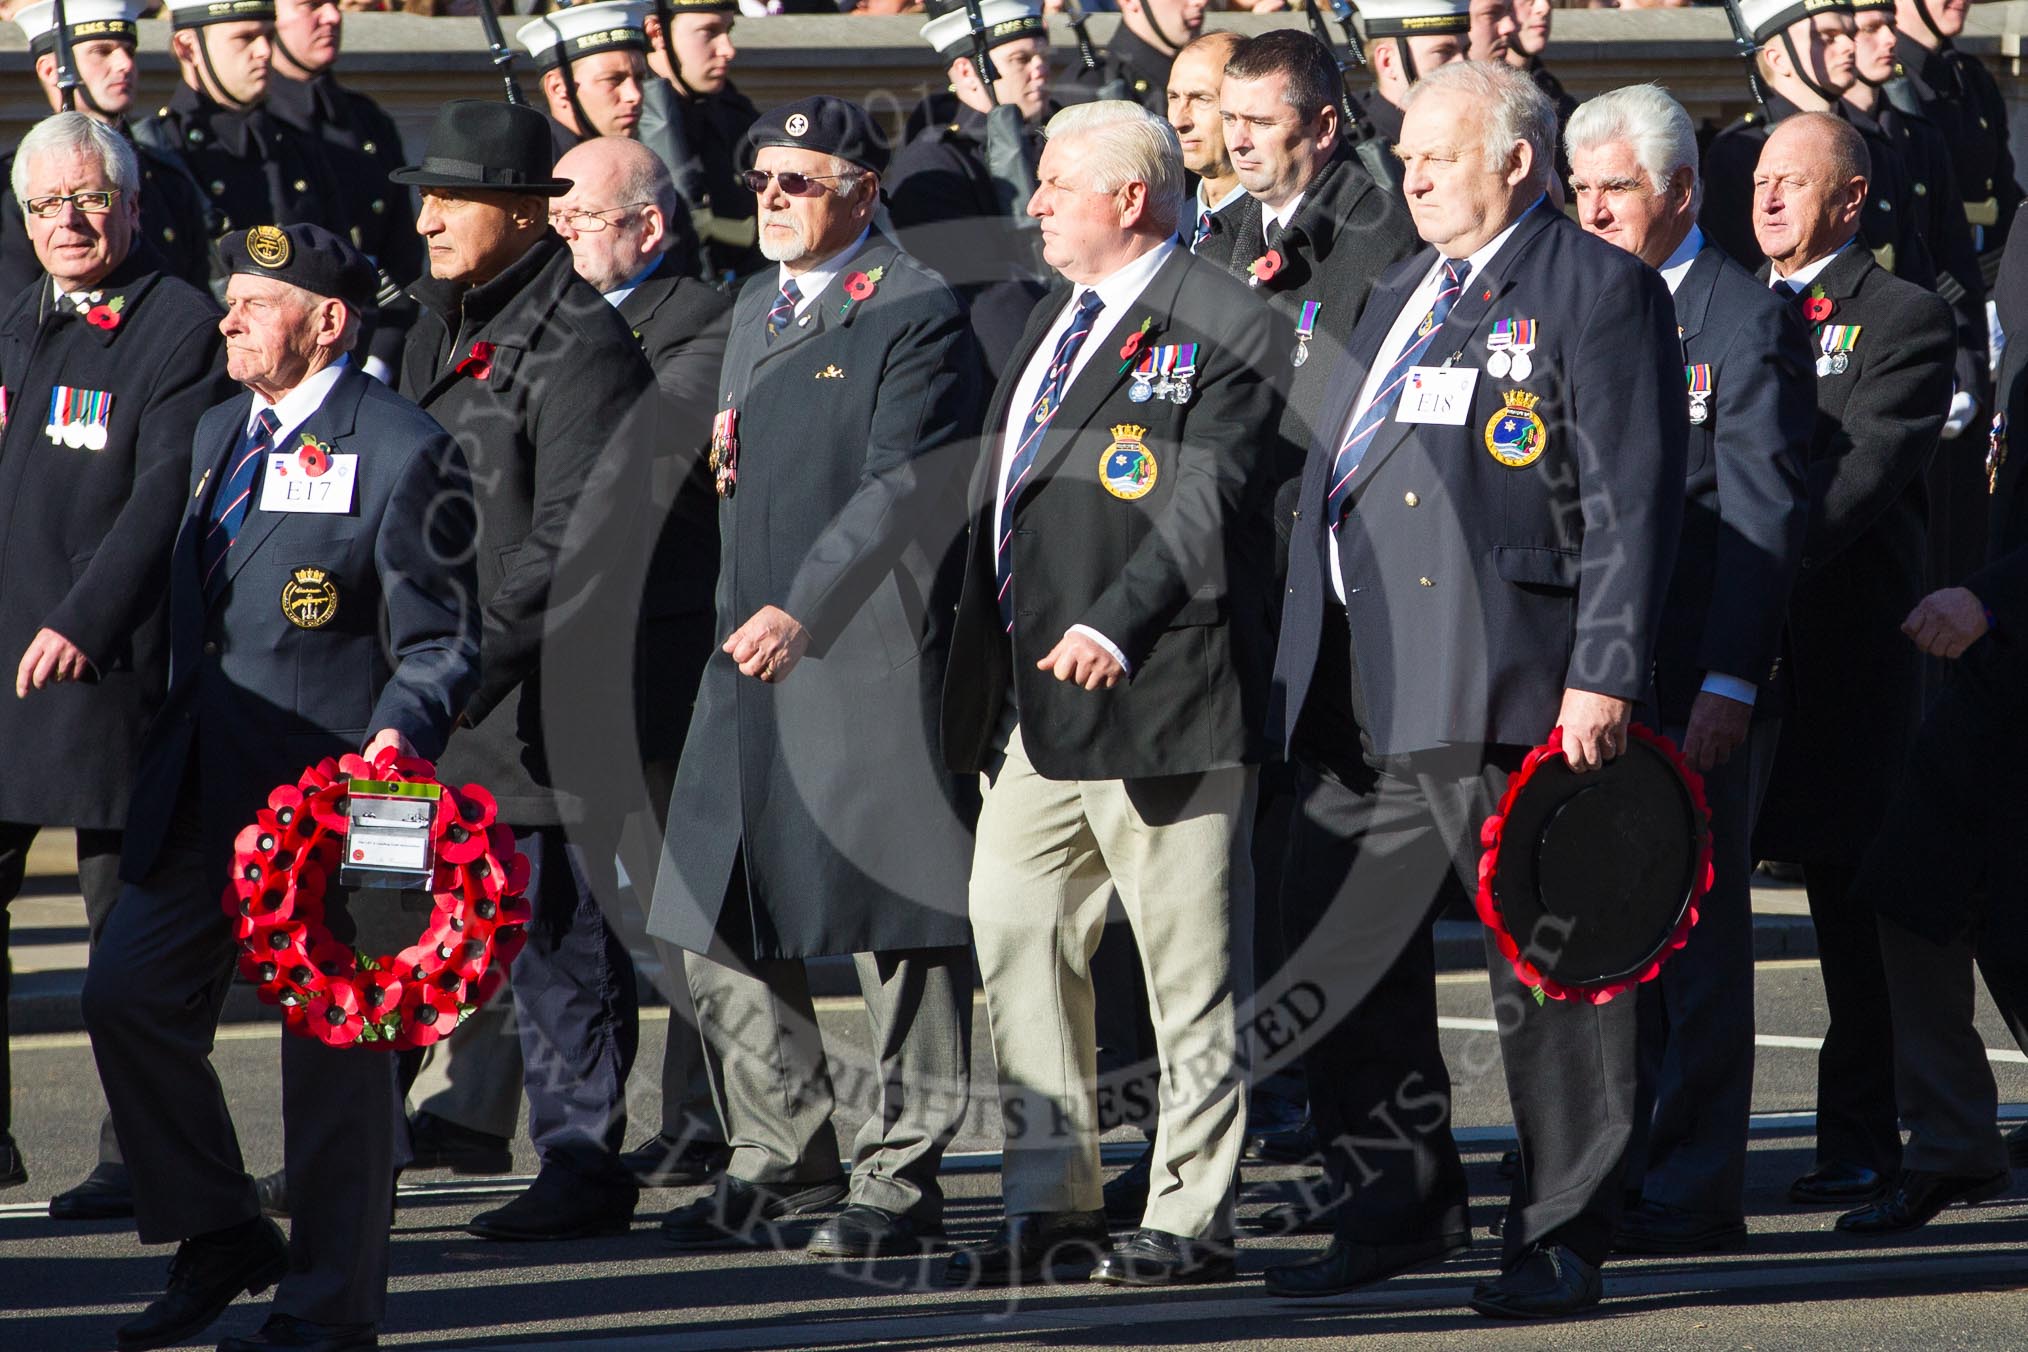 Remembrance Sunday 2012 Cenotaph March Past: Group E18 - HMS Andromeda Association..
Whitehall, Cenotaph,
London SW1,

United Kingdom,
on 11 November 2012 at 11:40, image #129